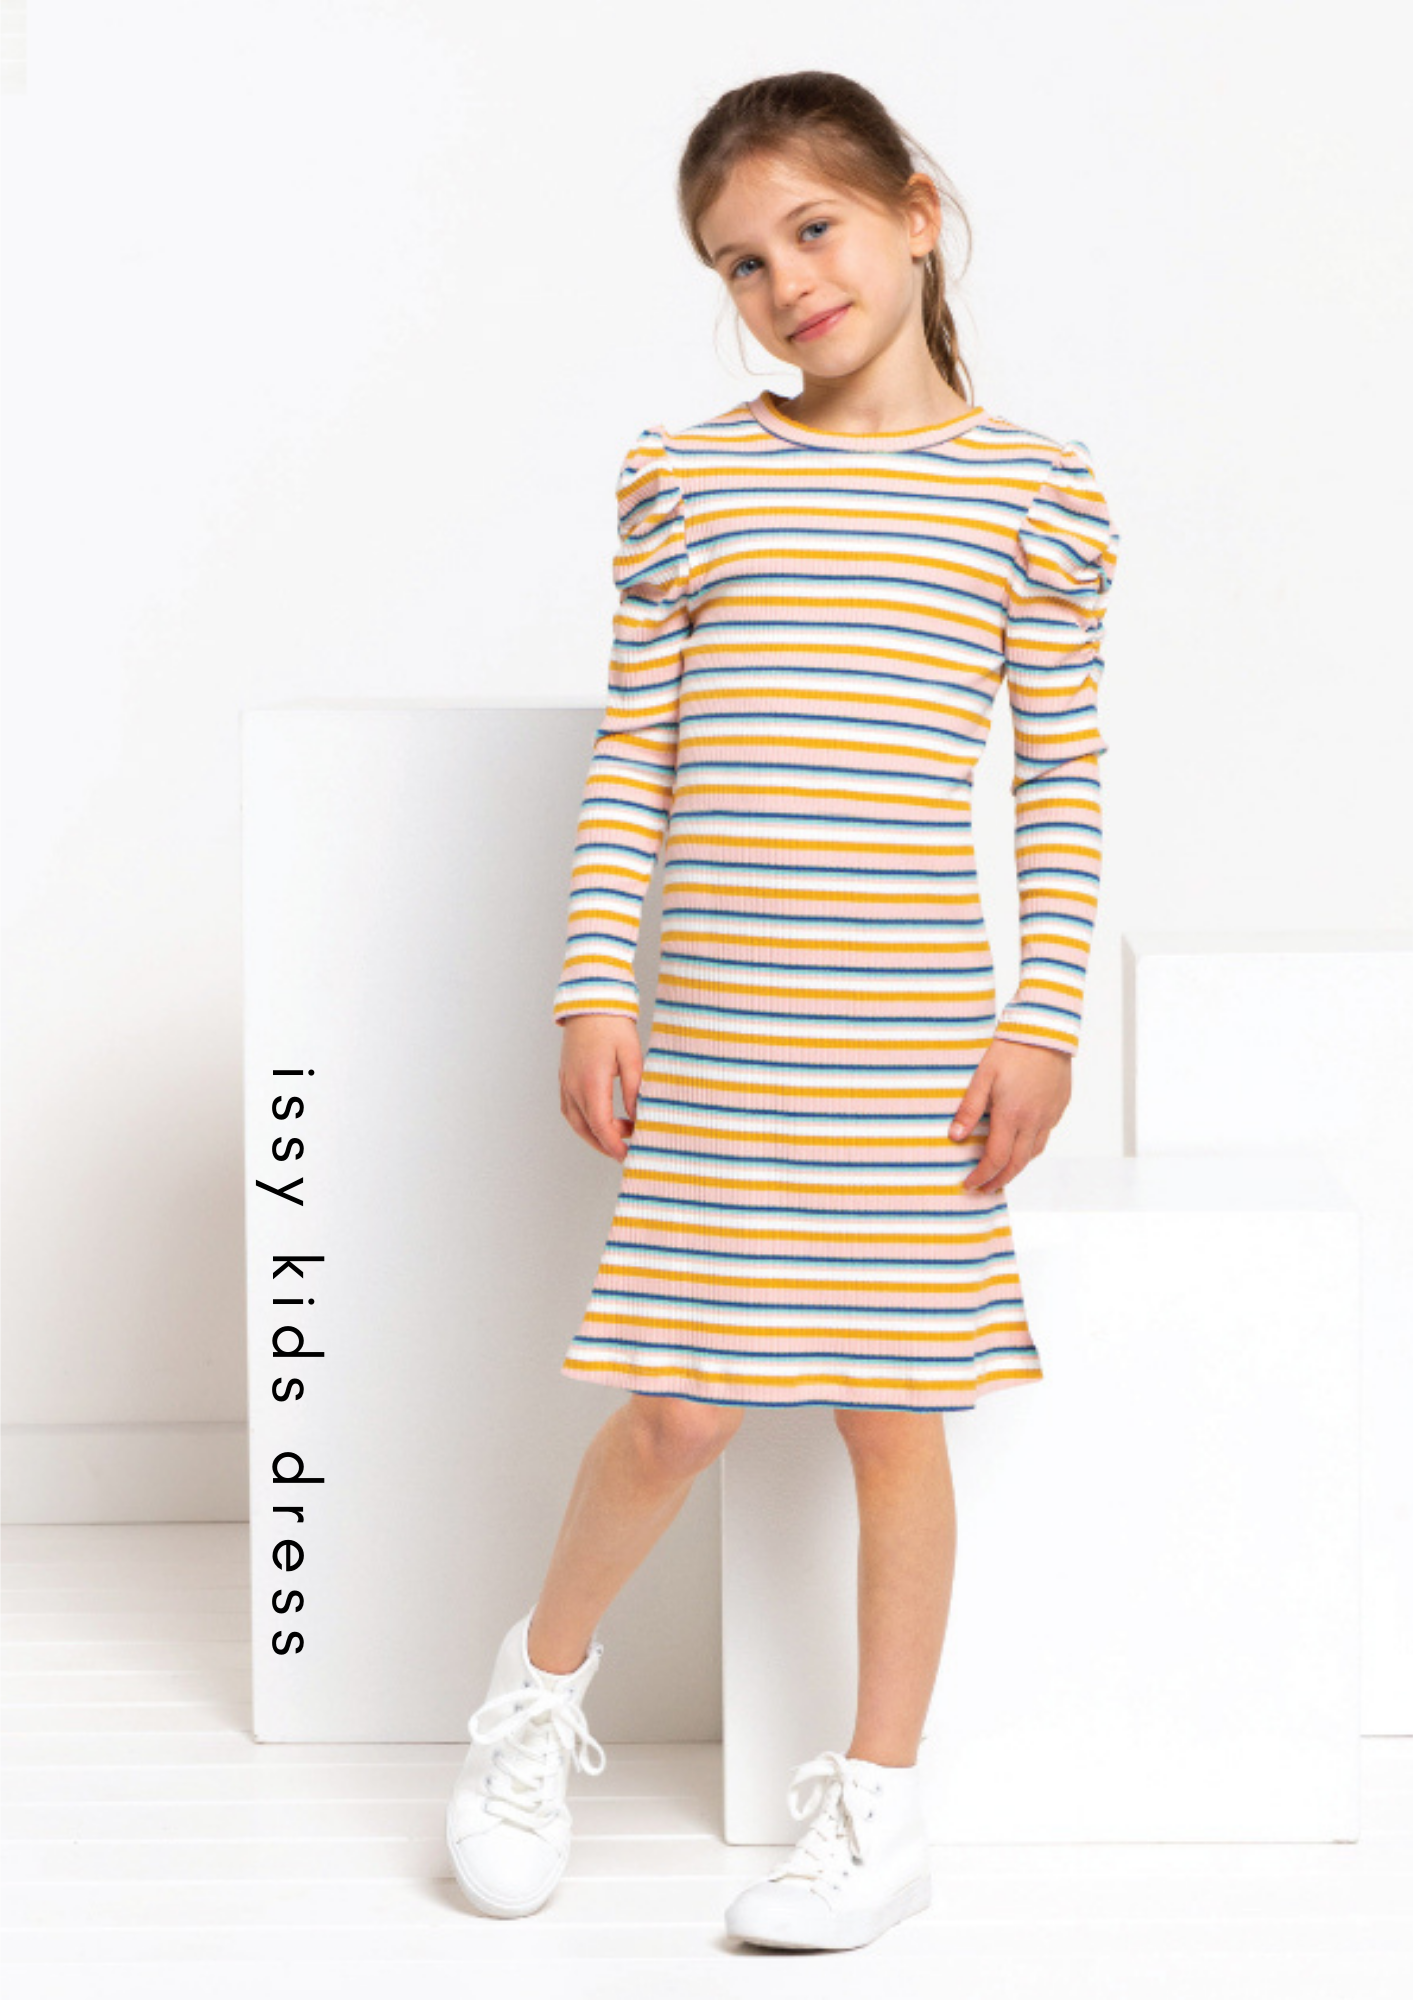 Style Arc's August Bonus Pattern: Issy Knit Dress / Top - available to purchase in Kids sizing 02-08 or Teens sizing -8-16